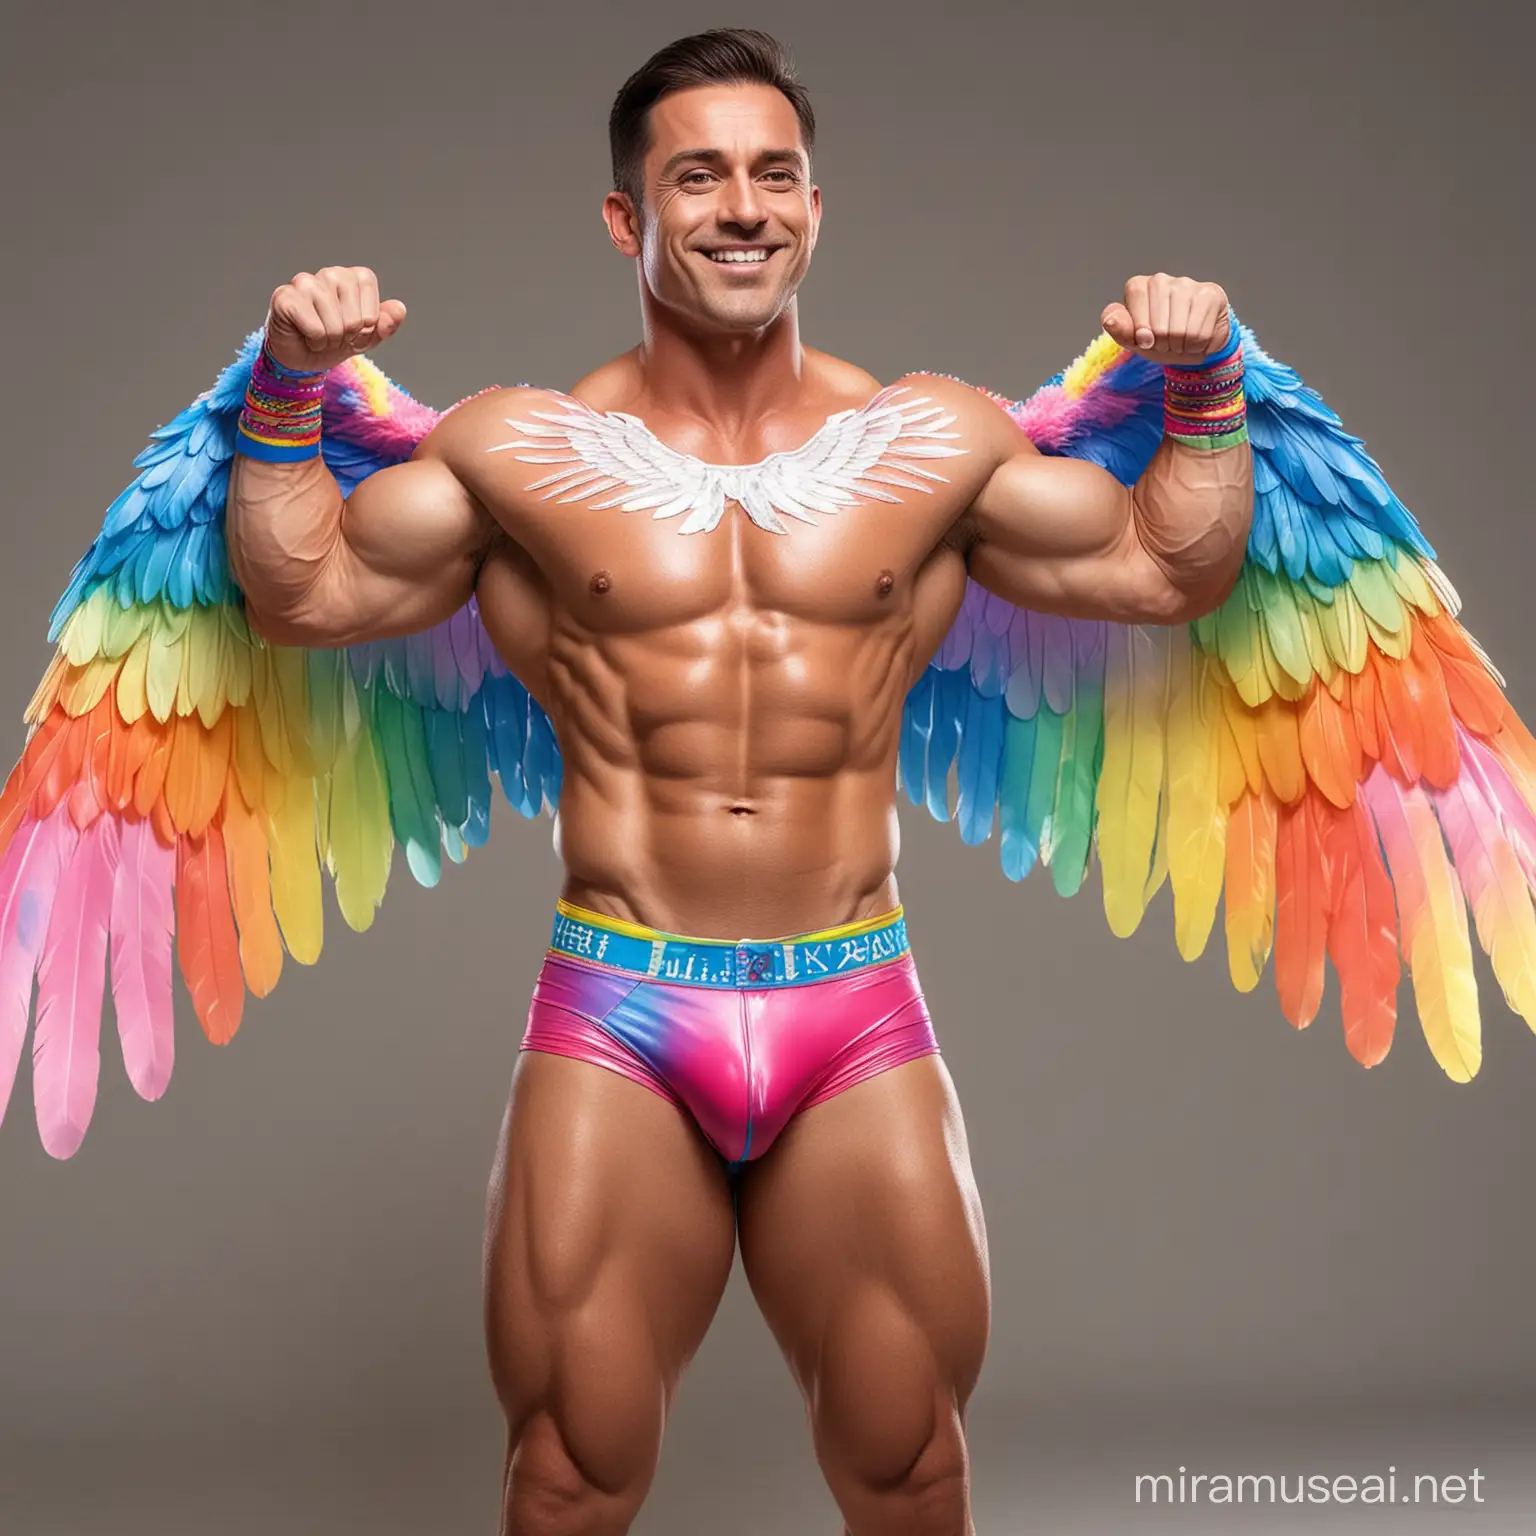 Topless 30s Ultra Beefy IFBB Bodybuilder Man wearing Multi-Highlighter Bright Rainbow Coloured See Through Eagle Wings Jacket short shorts and Flexing Big Strong Arm with Doraemon